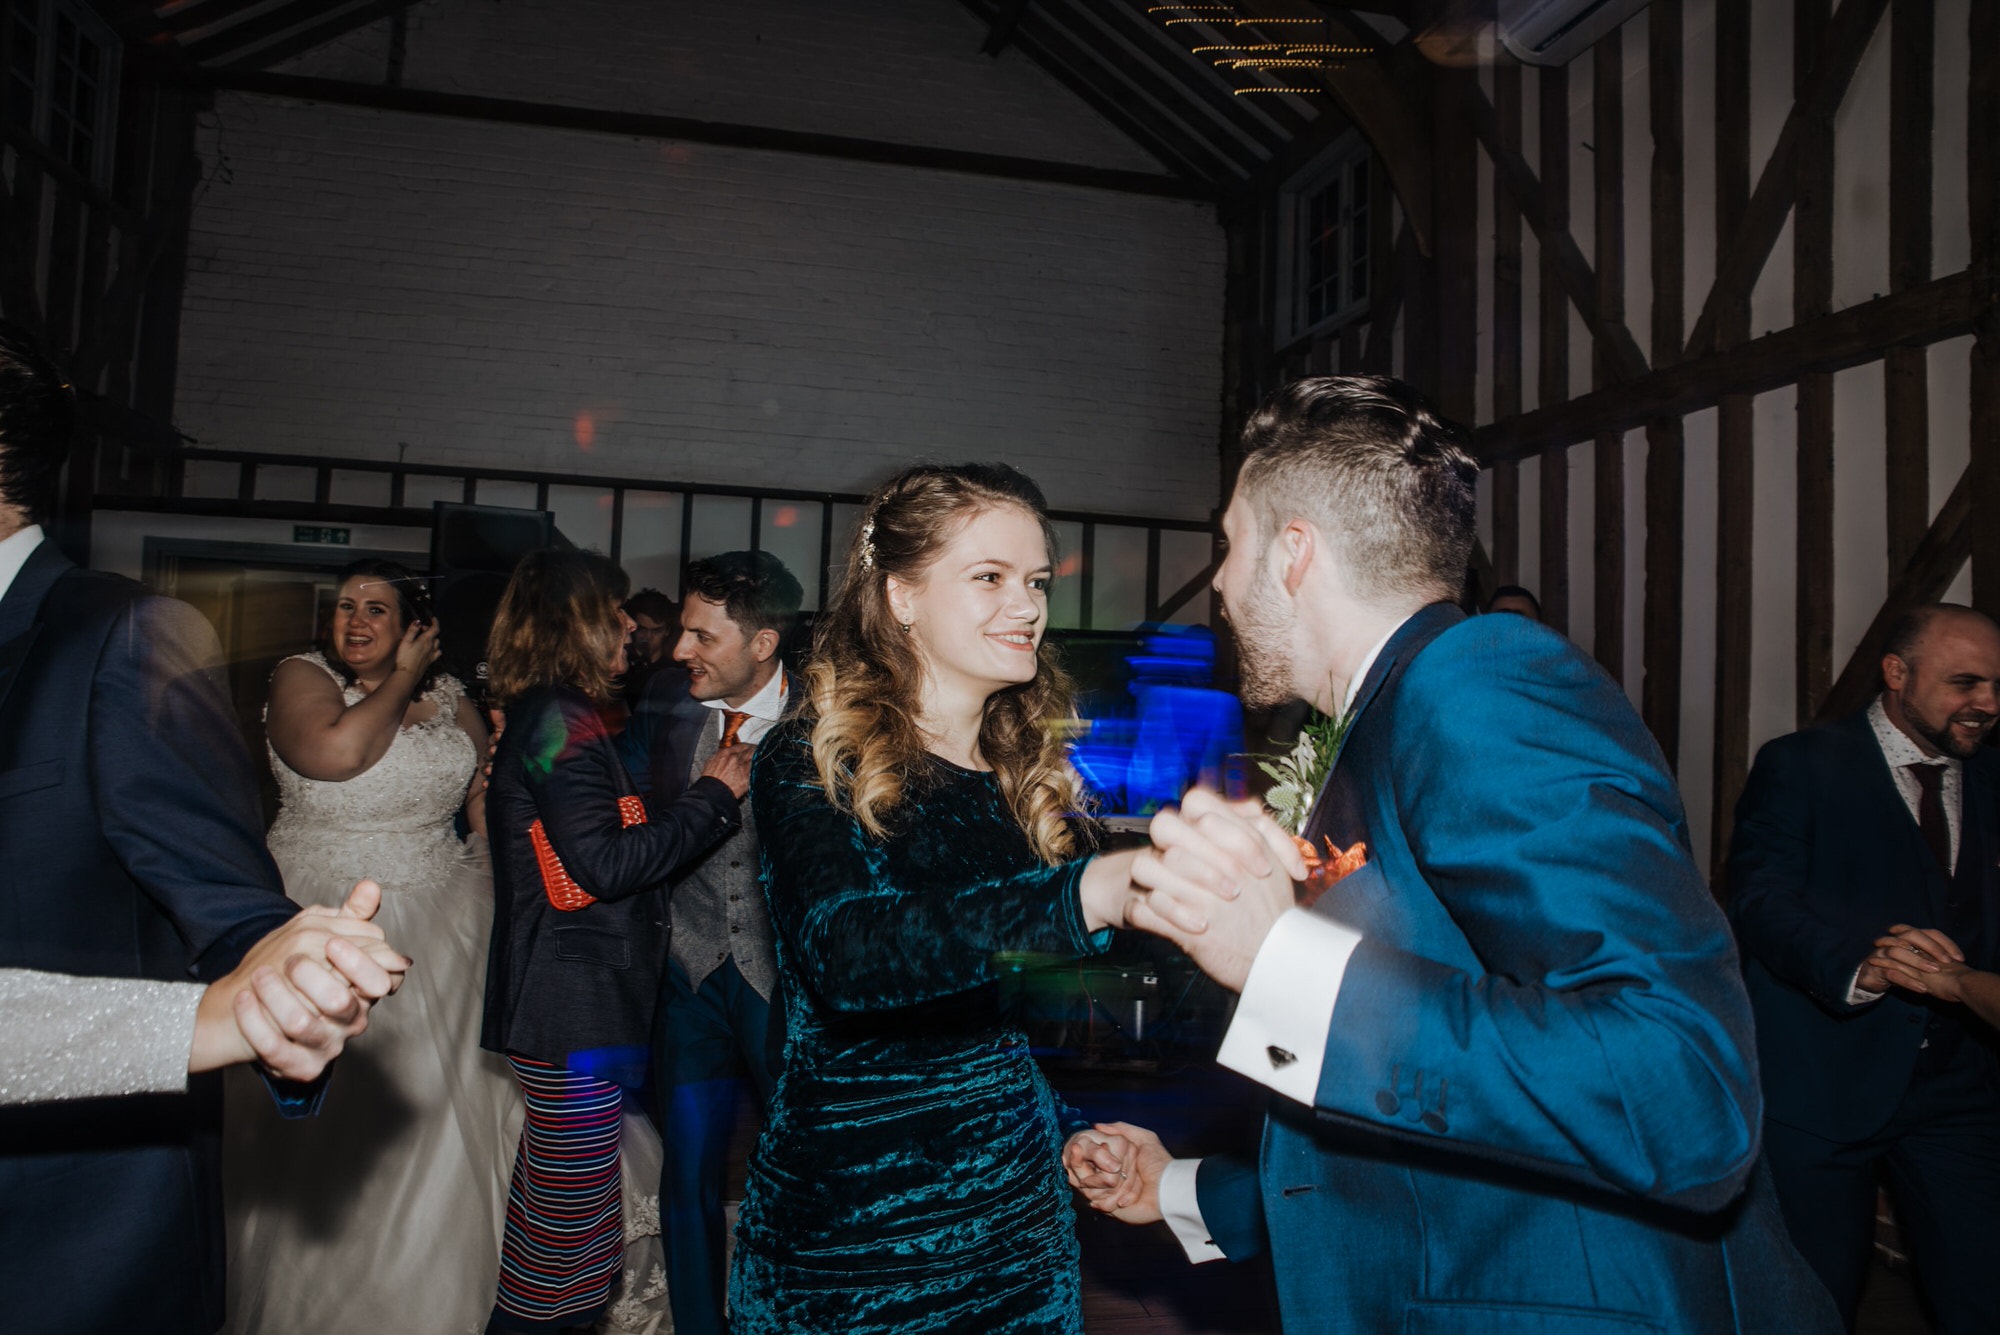 Dancing guests and bride and groom at the reception Roshni photography The Milling Barn, Bluntswood Hall, Throcking wedding photographer